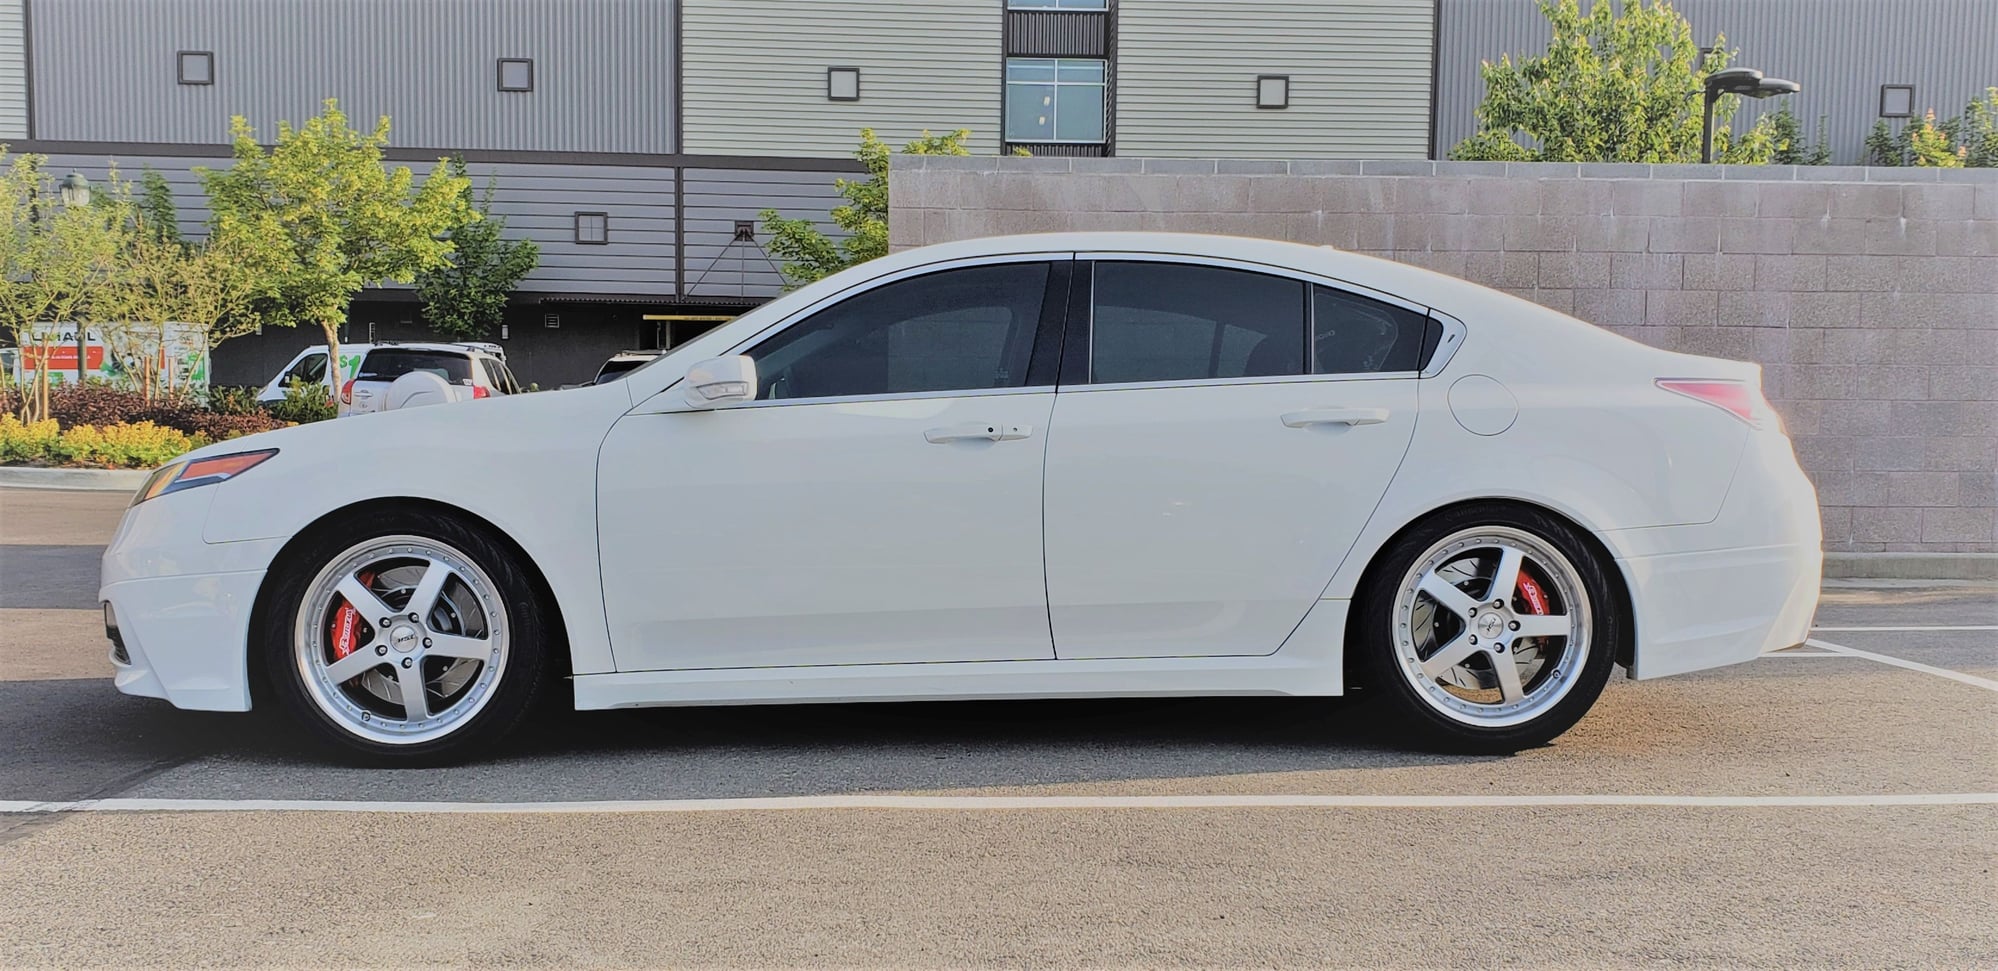 2012 Acura TL - SOLD:Modified but excellent condition 2012 Acura TL Sh-AWD68k miles For Sale $25k OBO - Used - VIN 19UUA9F56CA006357 - 68,068 Miles - 6 cyl - AWD - Automatic - Sedan - White - Issaquah, WA 98027, United States